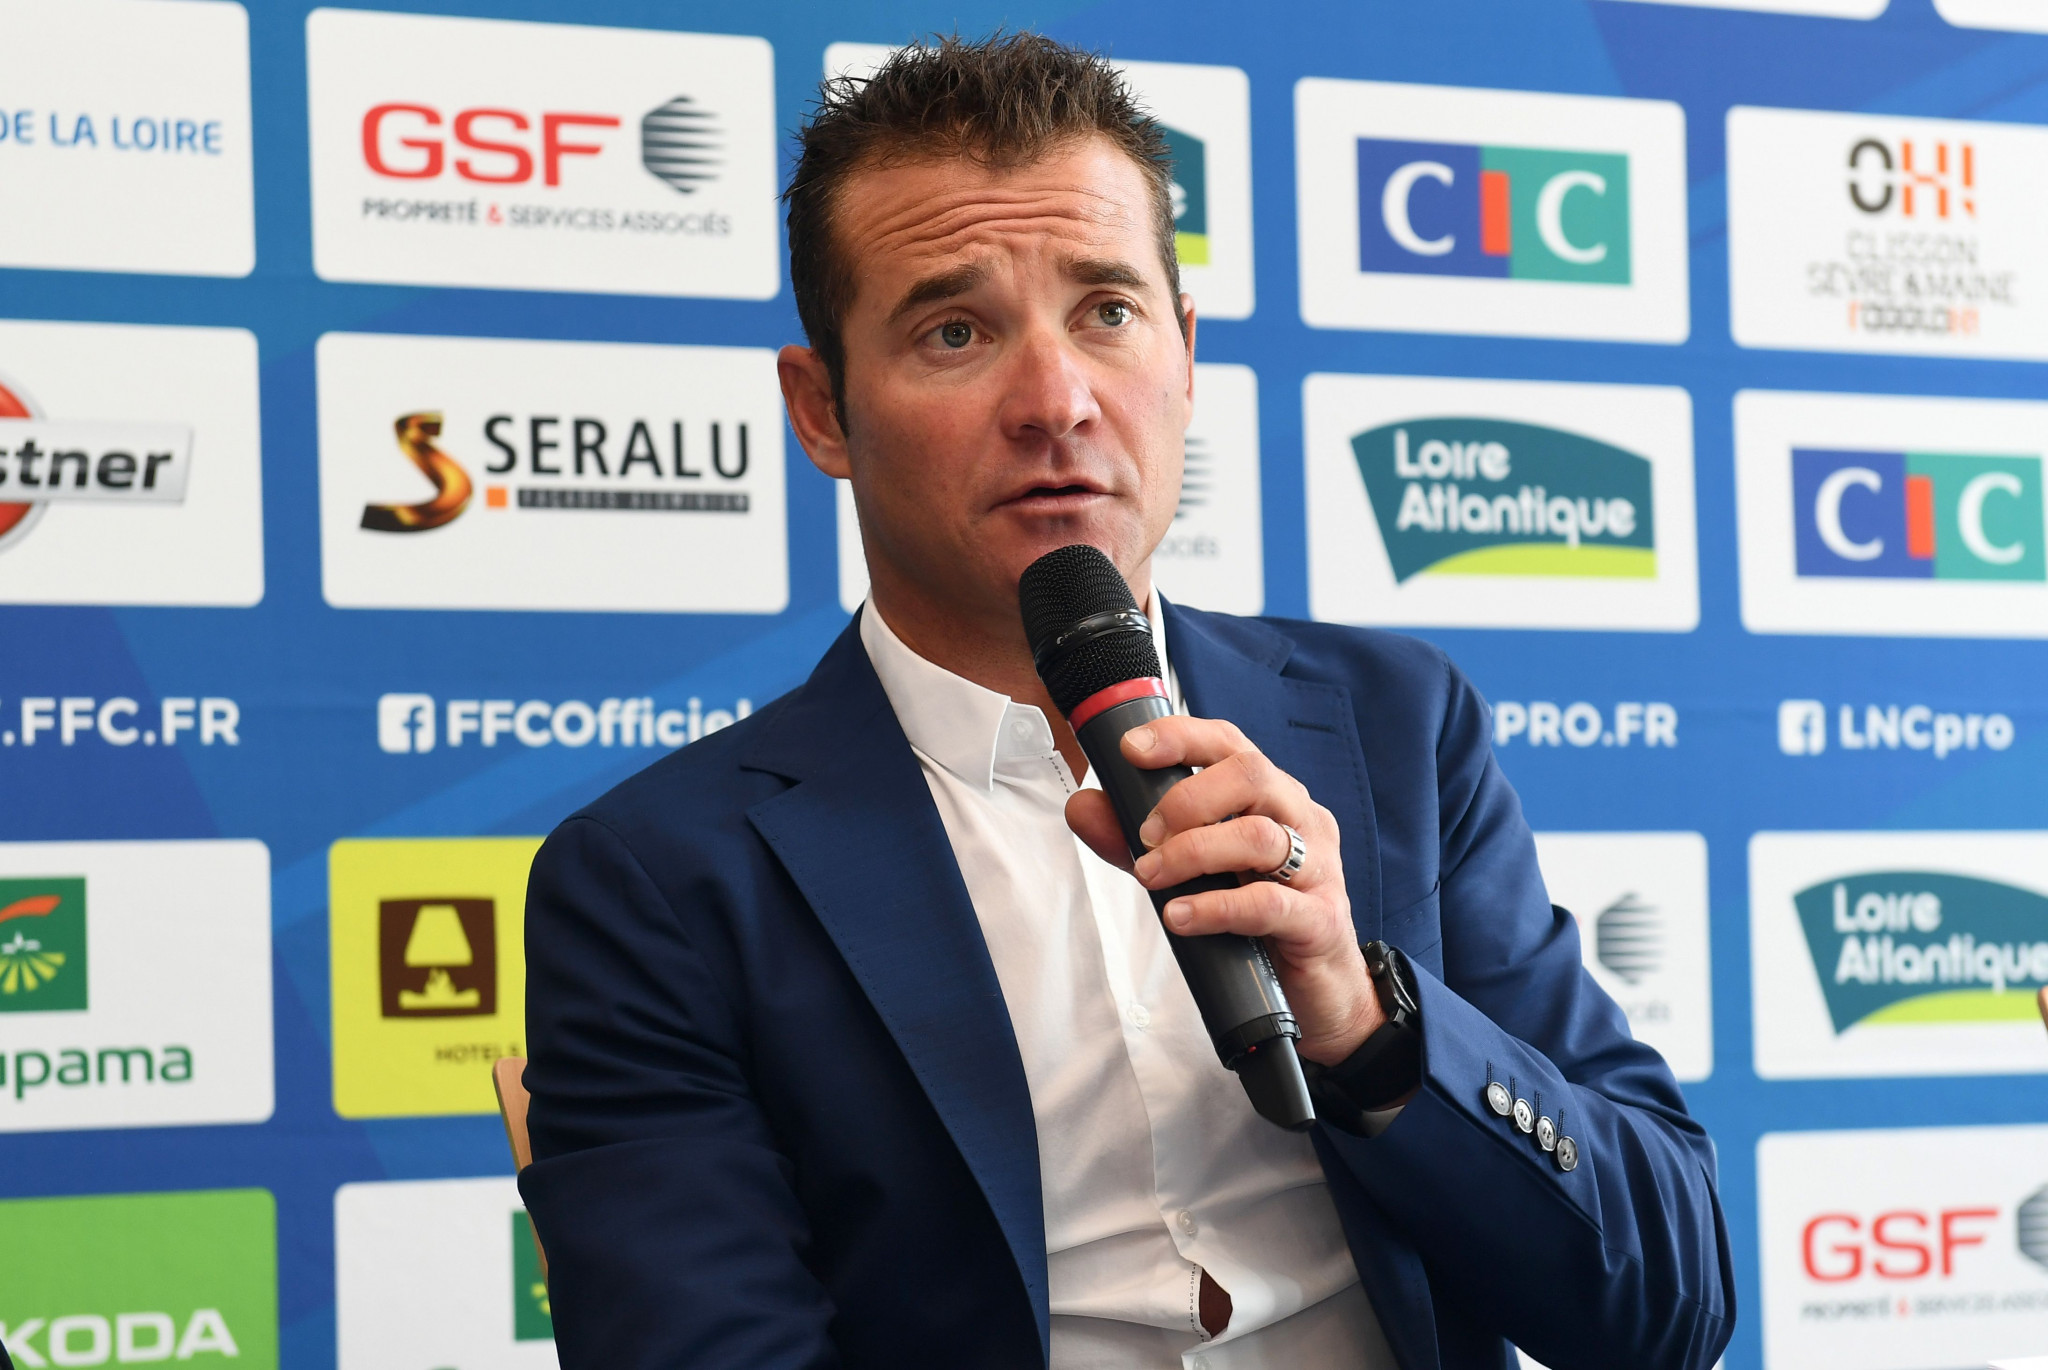 French cycling manager Voeckler warns best riders will skip Tokyo 2020 for Tour de France